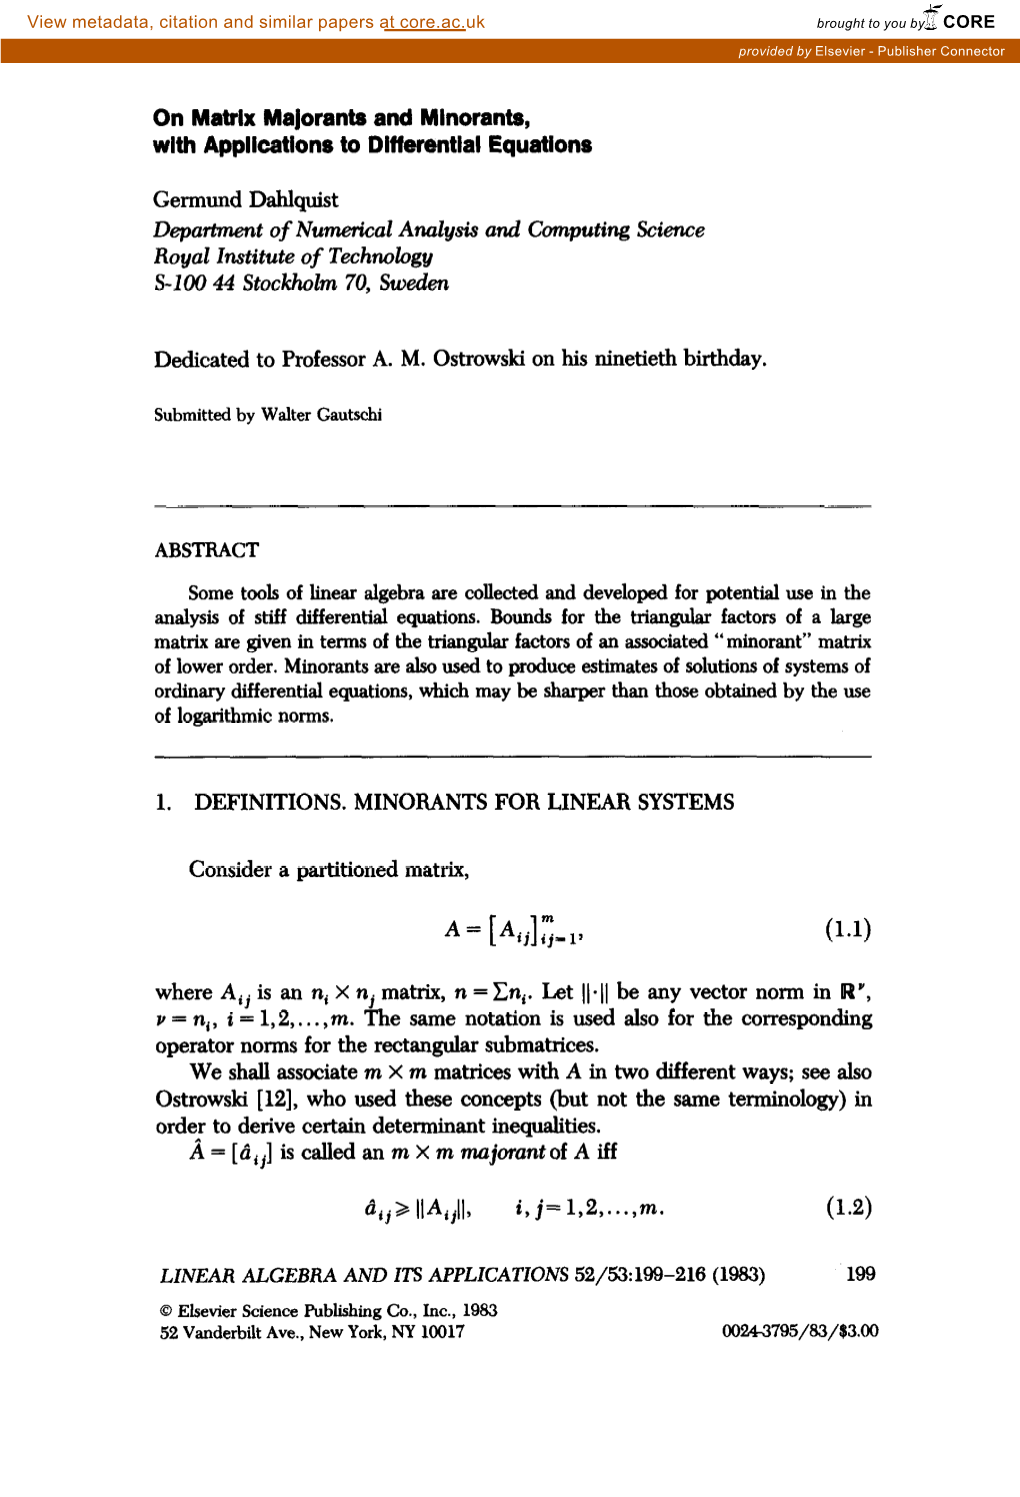 On Matrix Majorants and Mlnorants, with Applications to Differential Equations